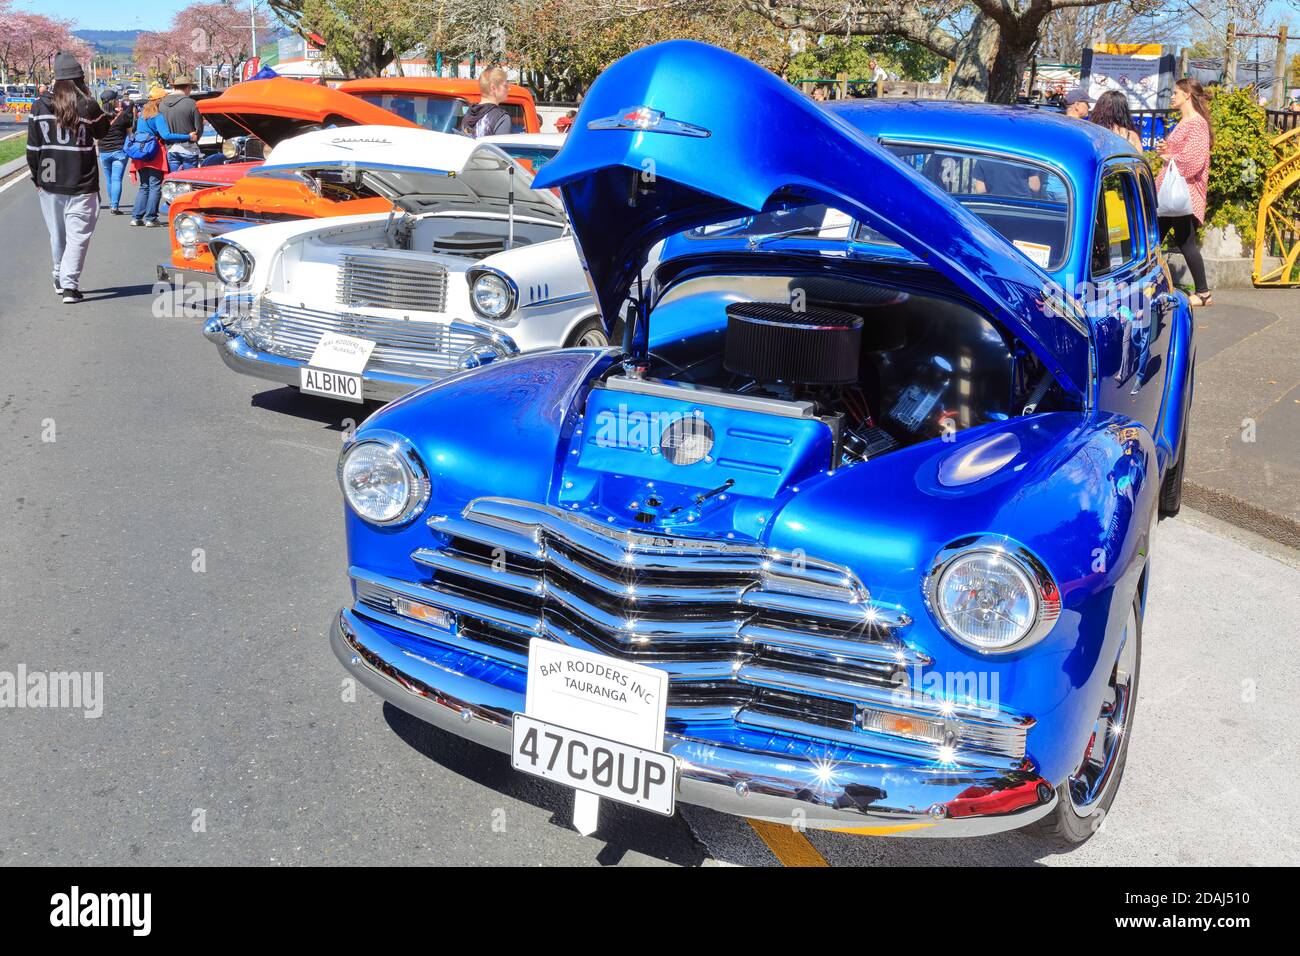 A blue 1947 Chevrolet Fleetmaster coupe and other classic cars at an outdoor car show in Tauranga, New Zealand Stock Photo